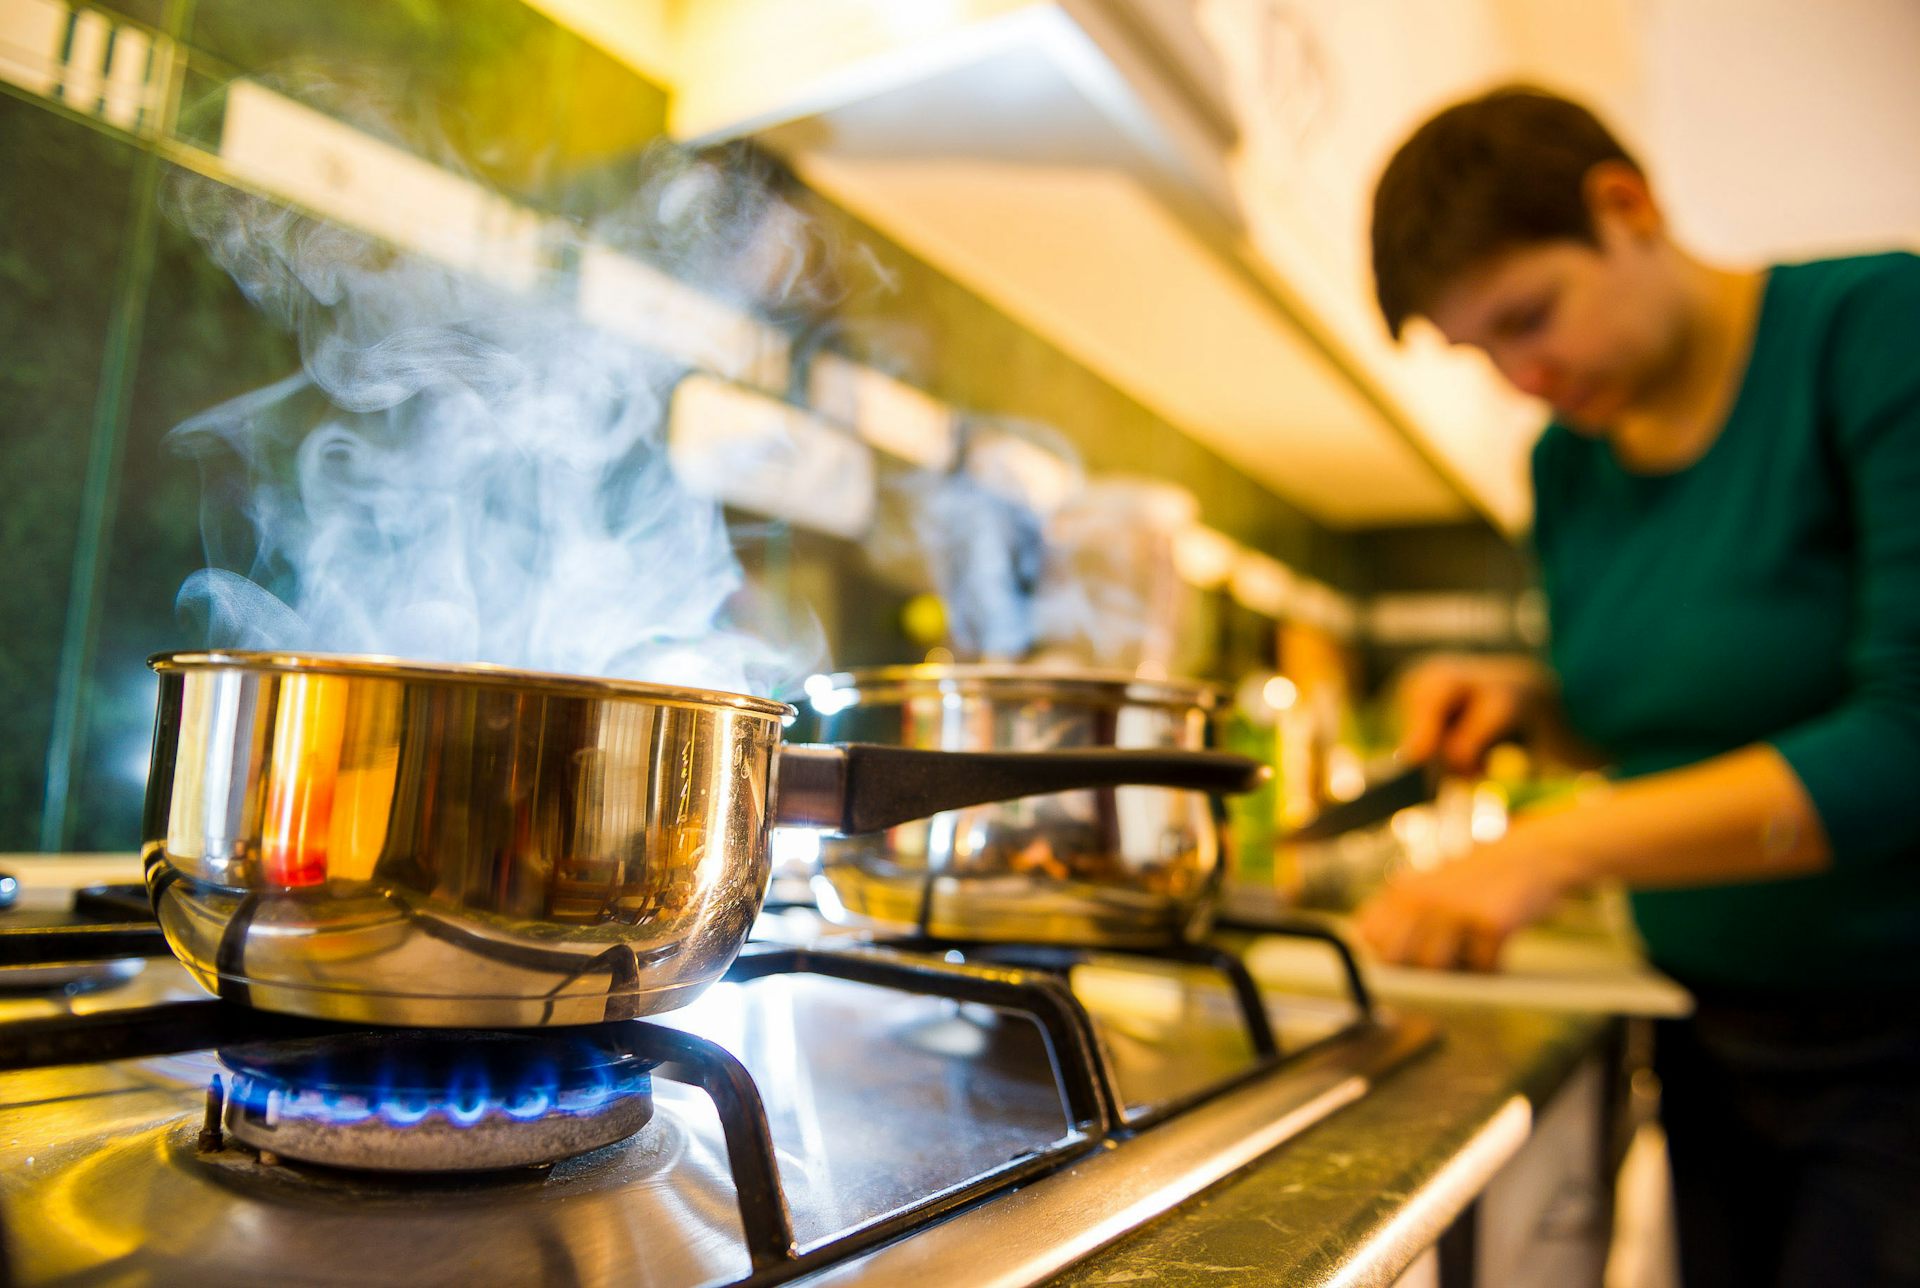 Seven ways to protect your health when cooking with gas